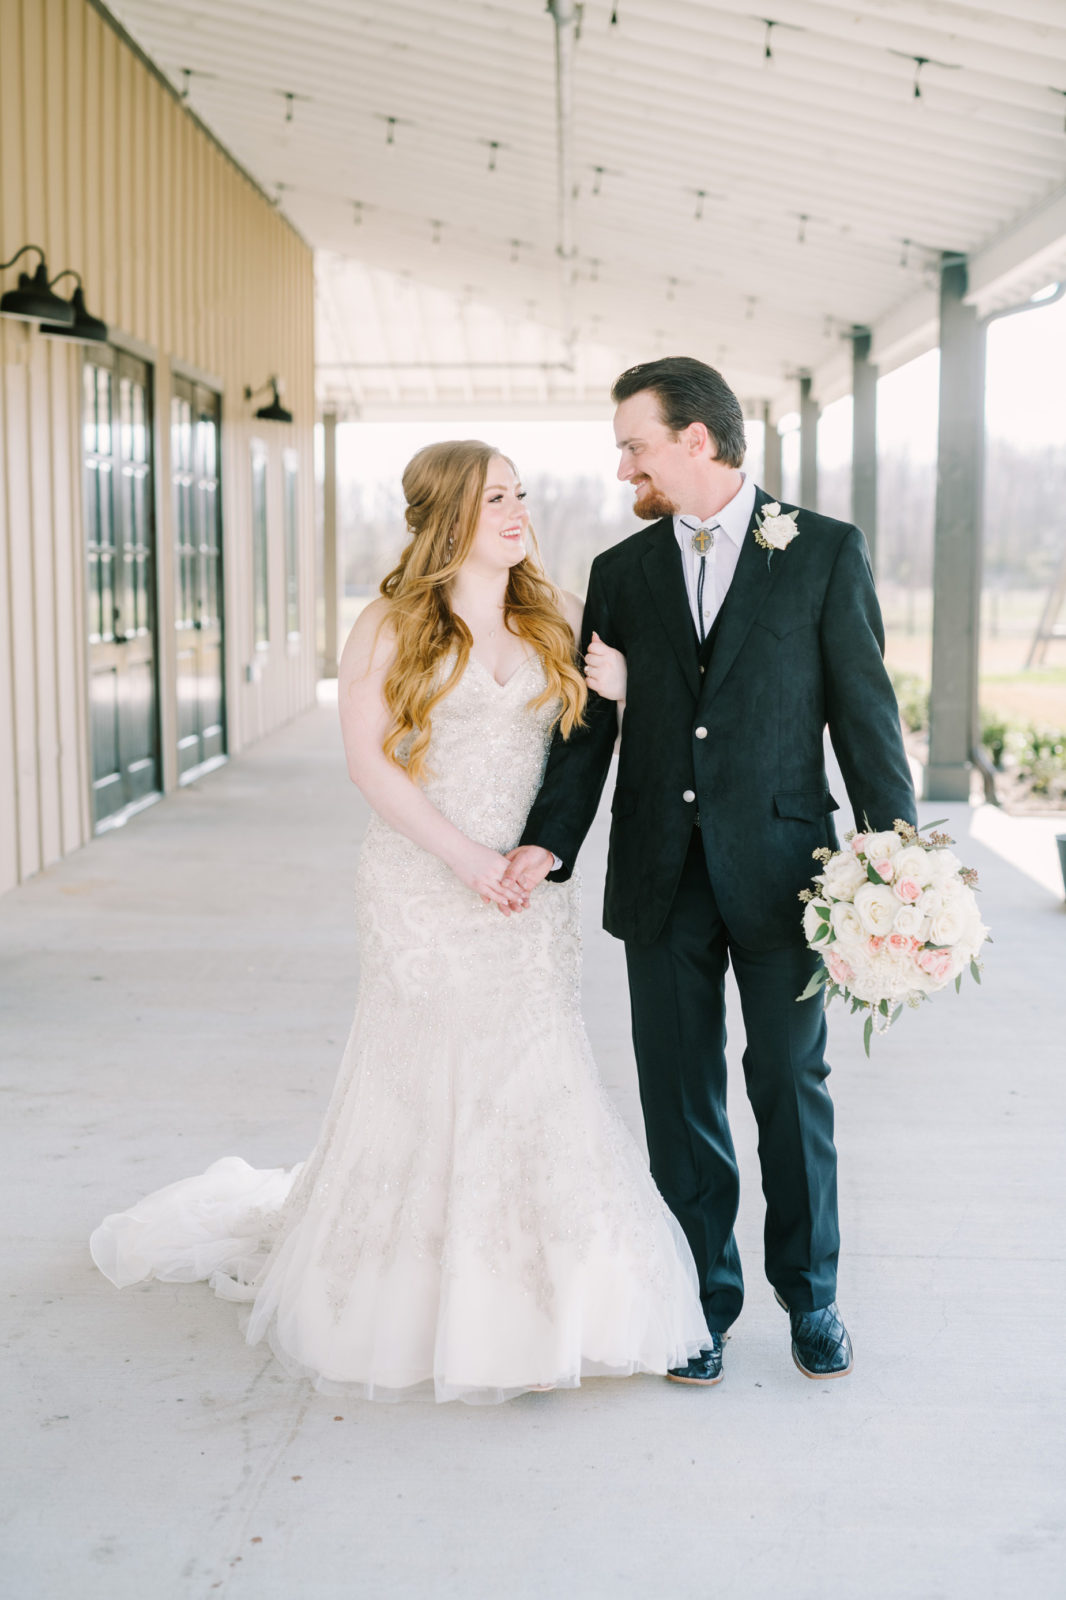 Newlyweds walk holding hands on their wedding day in Texas by Christina Elliott Photography. southern wedding vibe #ChristinaElliottPhotography #ChristinaElliottWeddings #StillWatersRanchWedding #Texasweddings #countrywedding #ranchwedding